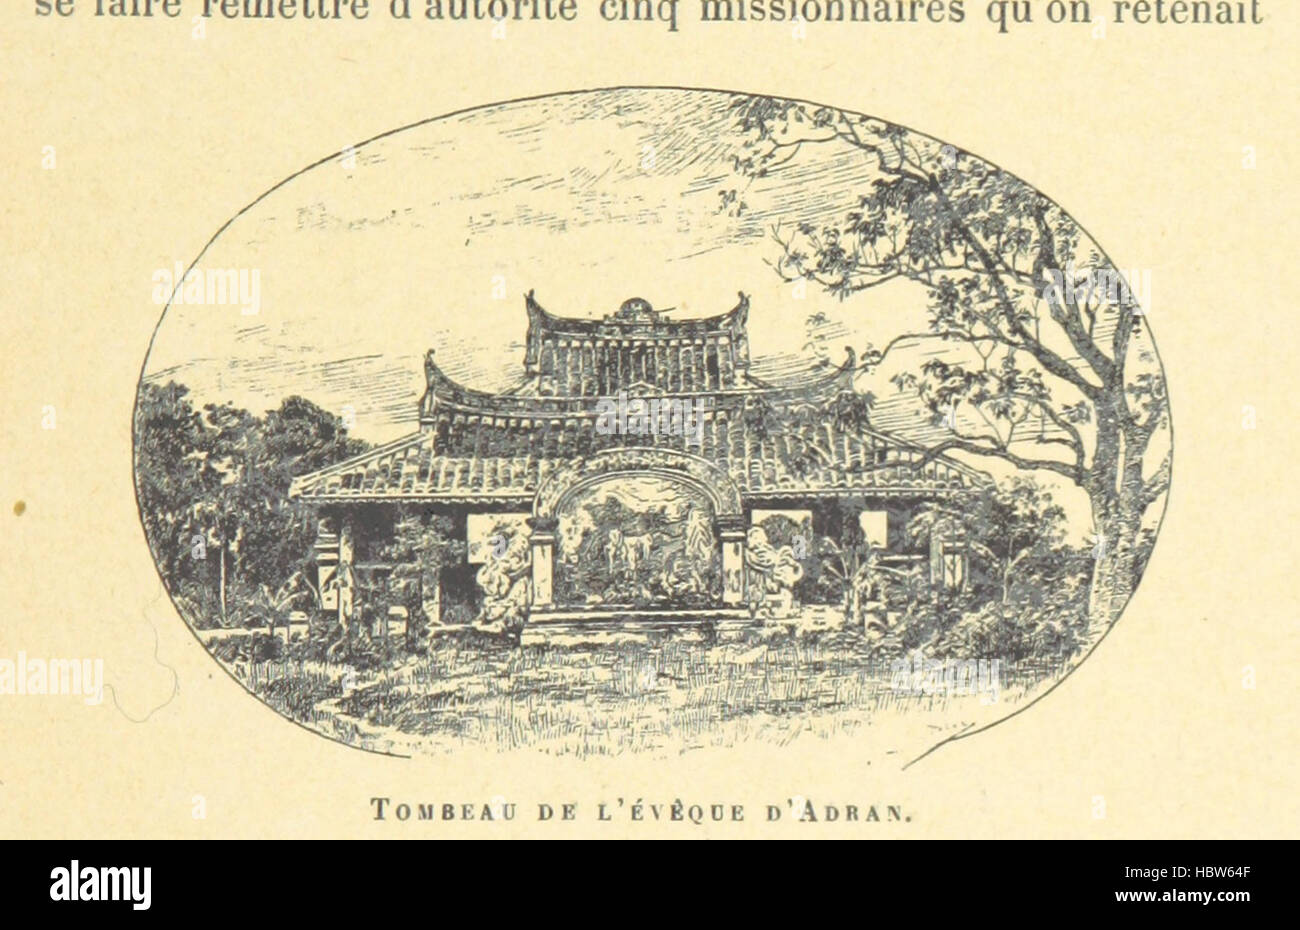 Image taken from page 69 of 'La France aux colonies' Image taken from page 69 of 'La France aux colonies' Stock Photo